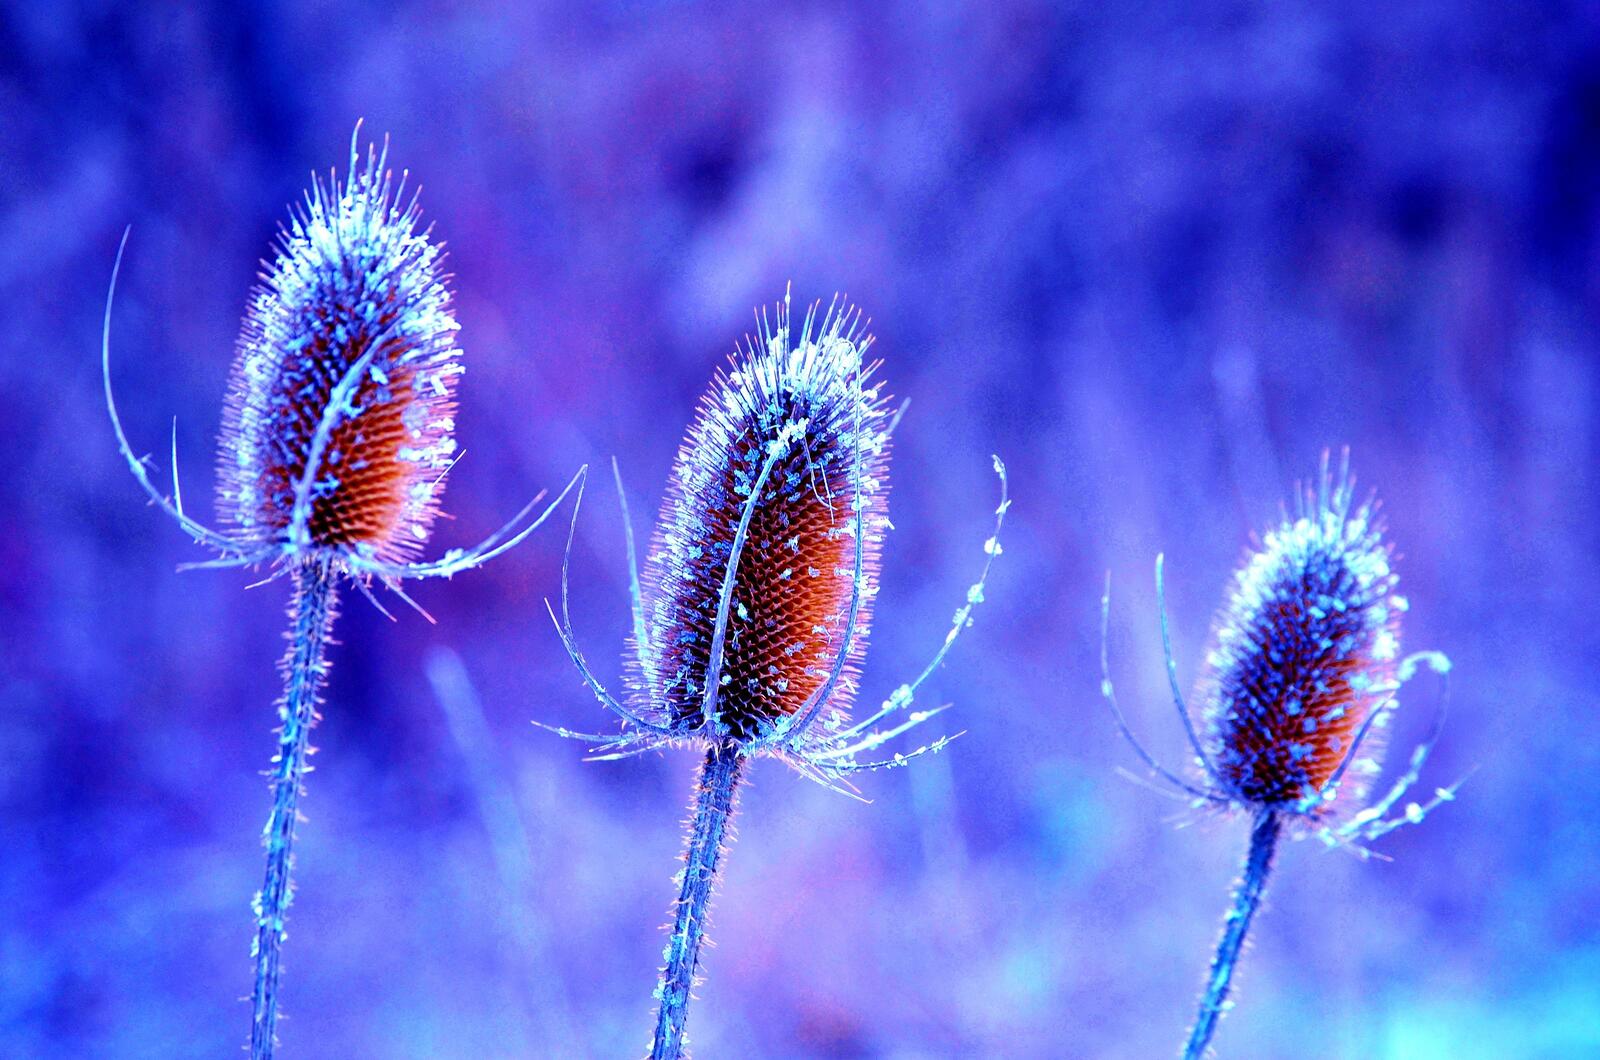 Wallpapers frost terrestrial plant macro photography on the desktop